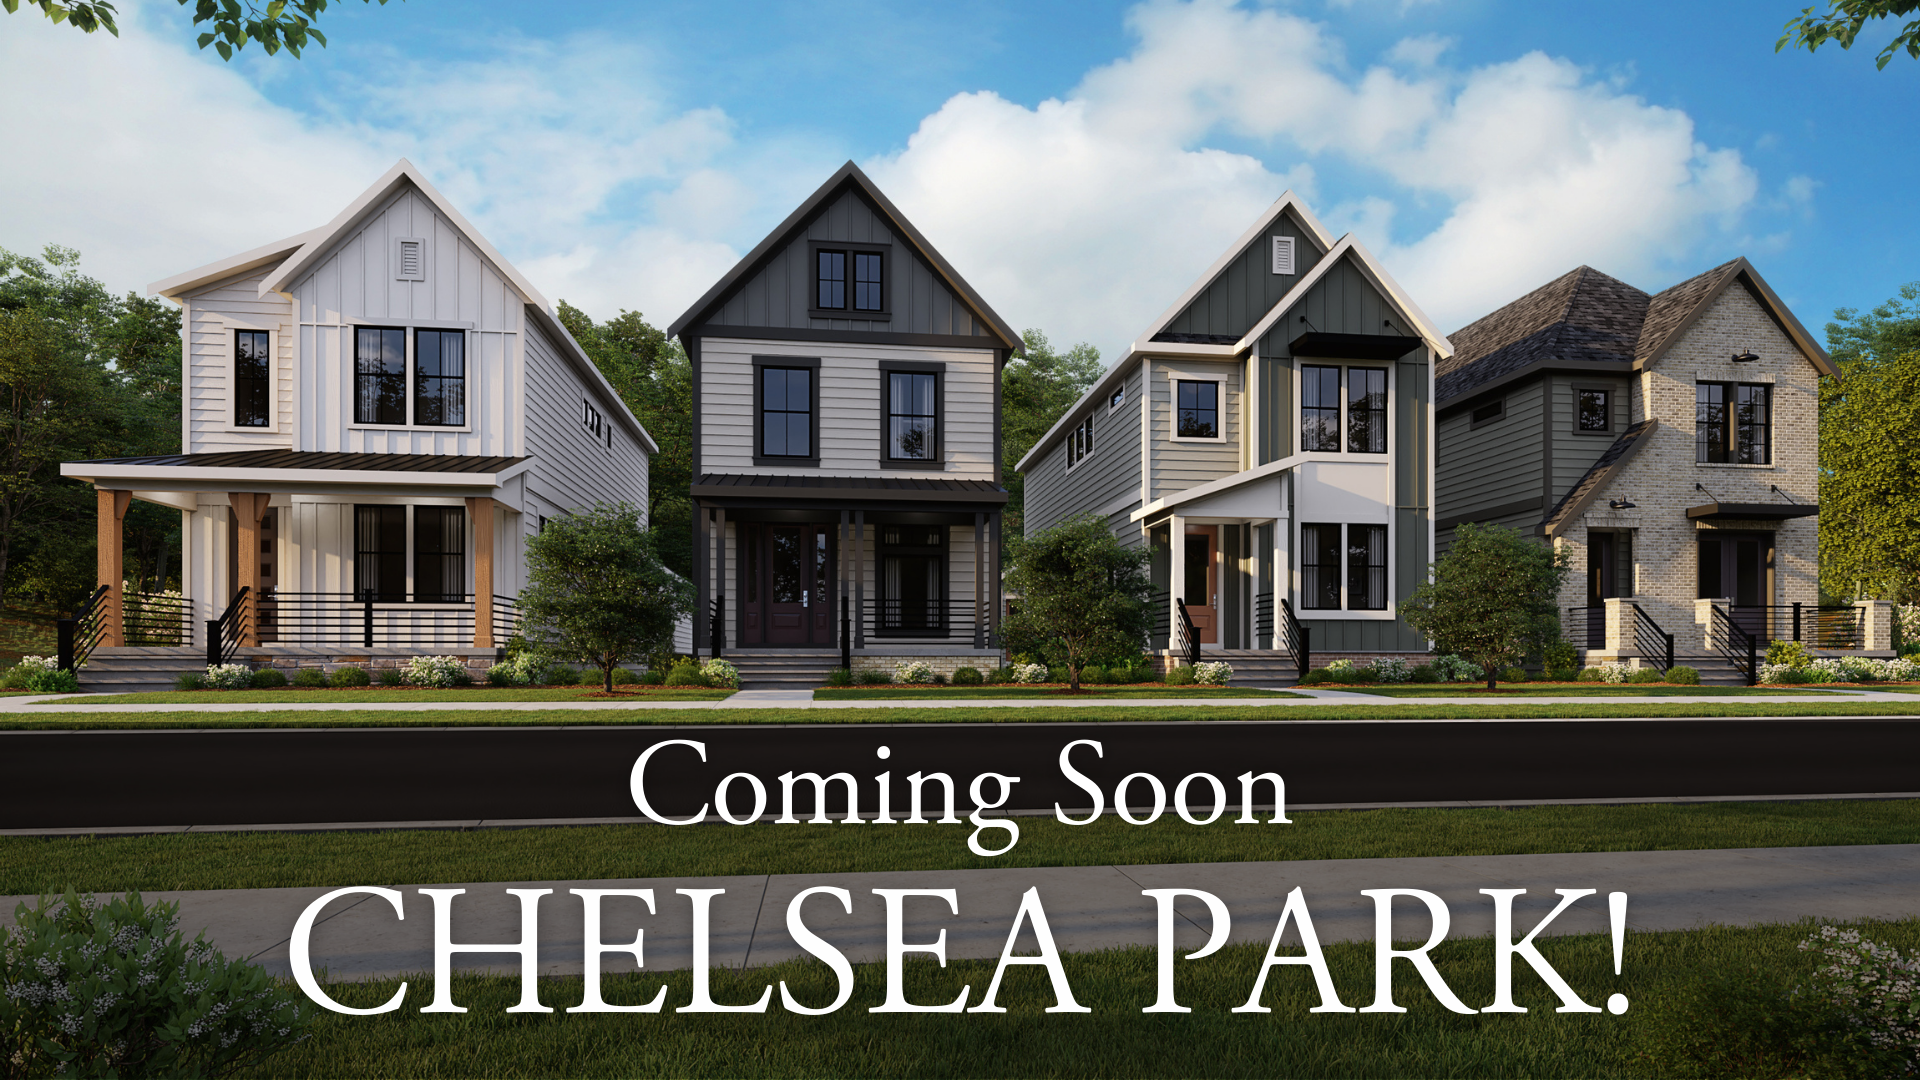 Chelsea Park Coming Soon to Zionsville, IN!